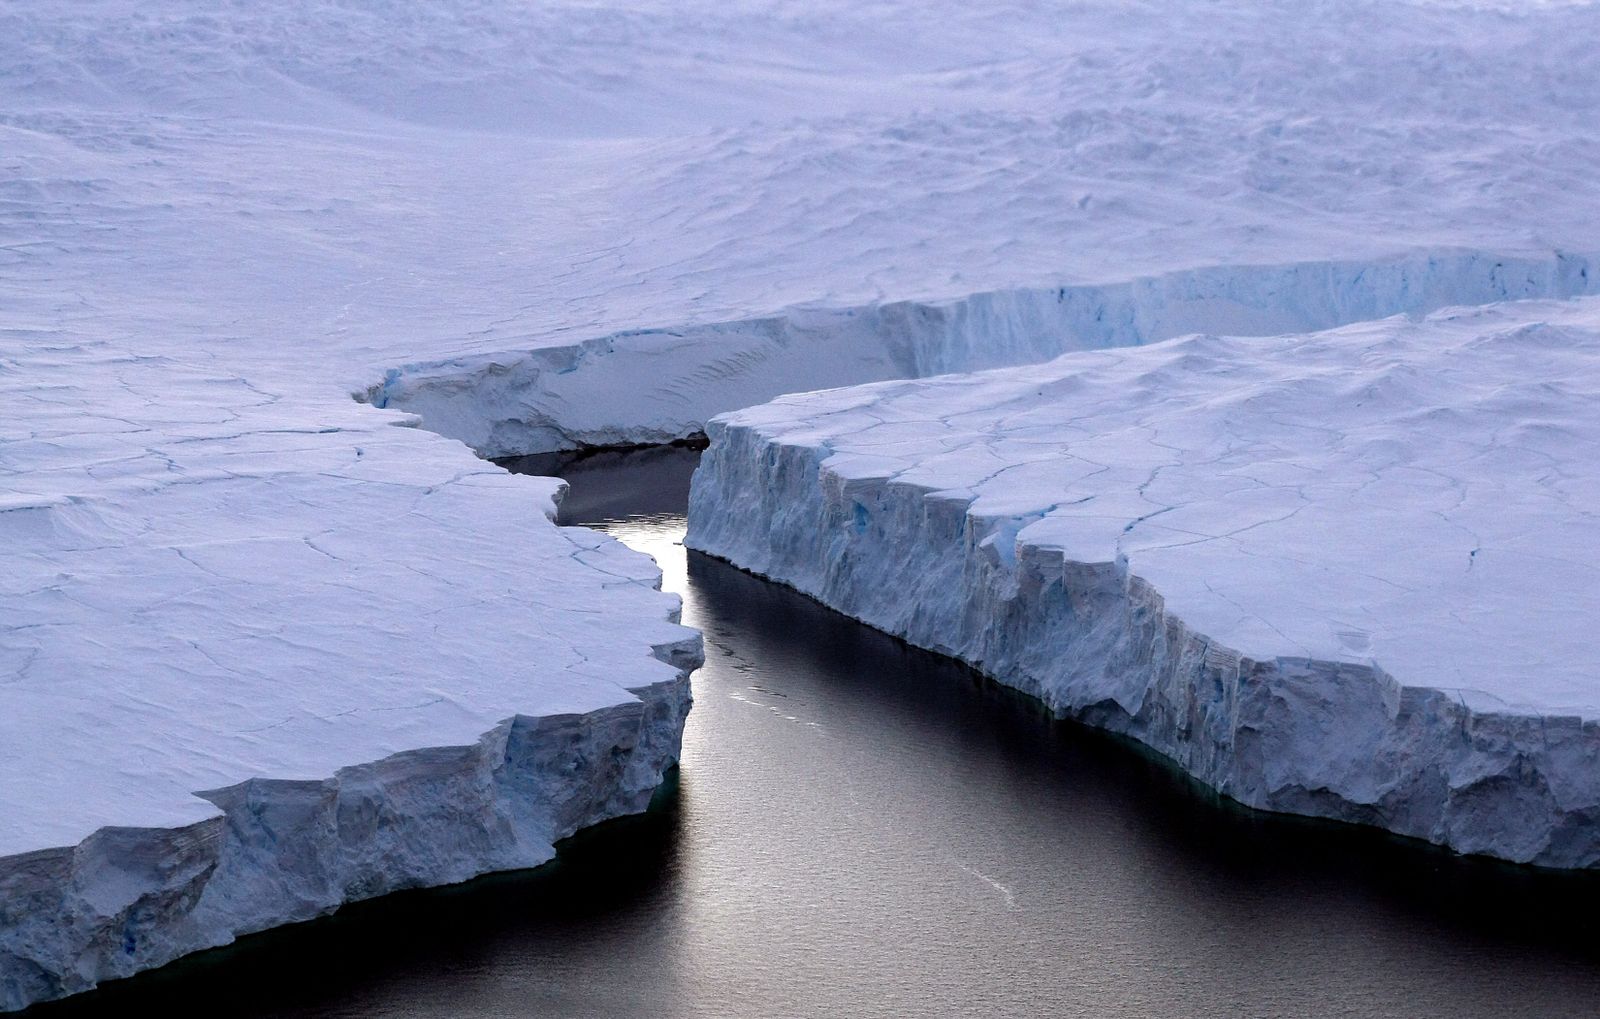 The World's Largest Iceberg Is Drifting Three Miles Into the Ocean Each Day